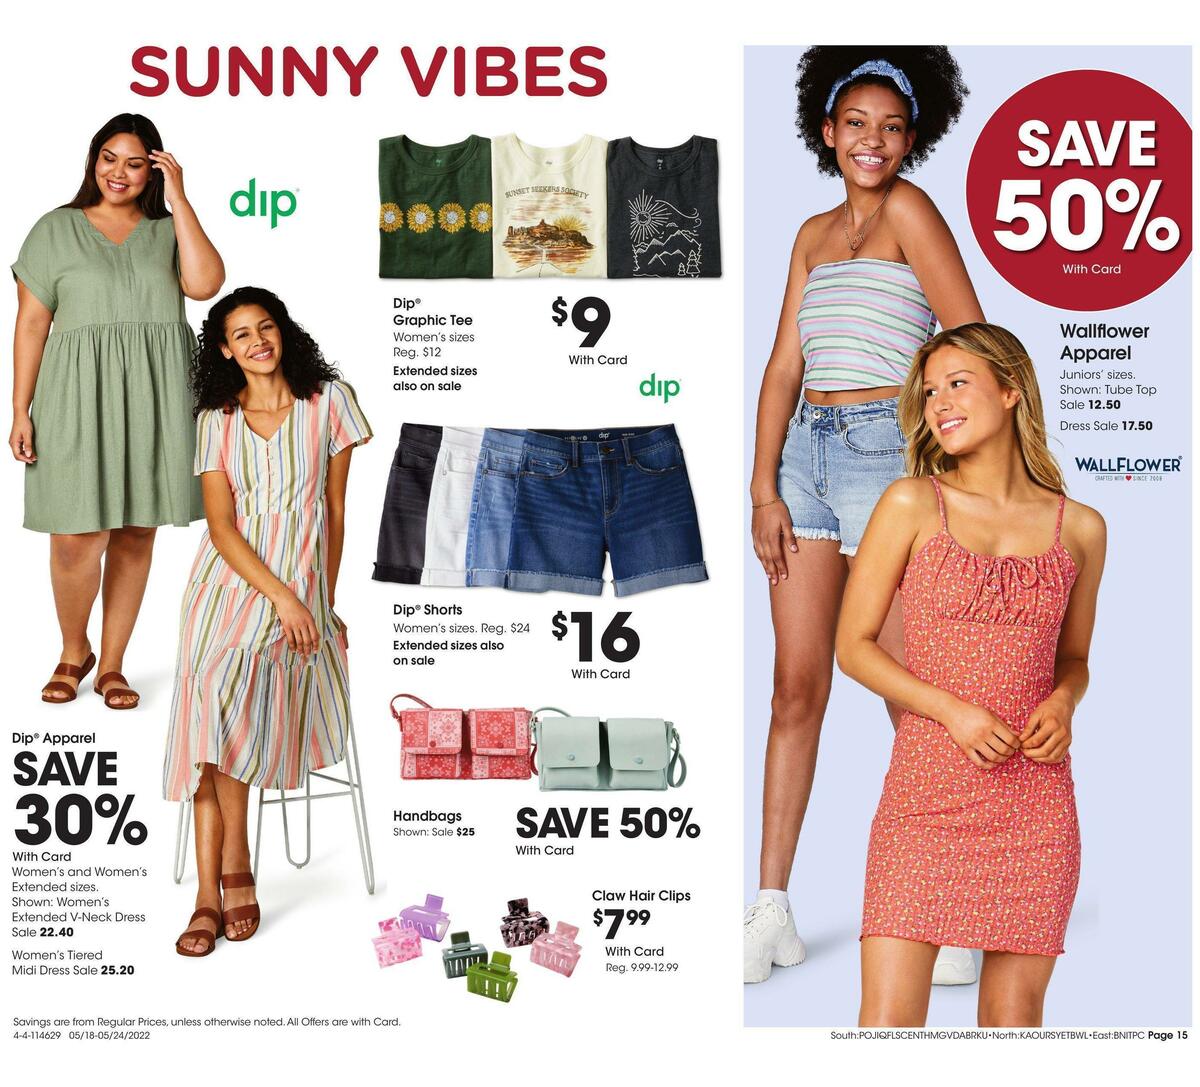 Fred Meyer General Merchandise Weekly Ad from May 18